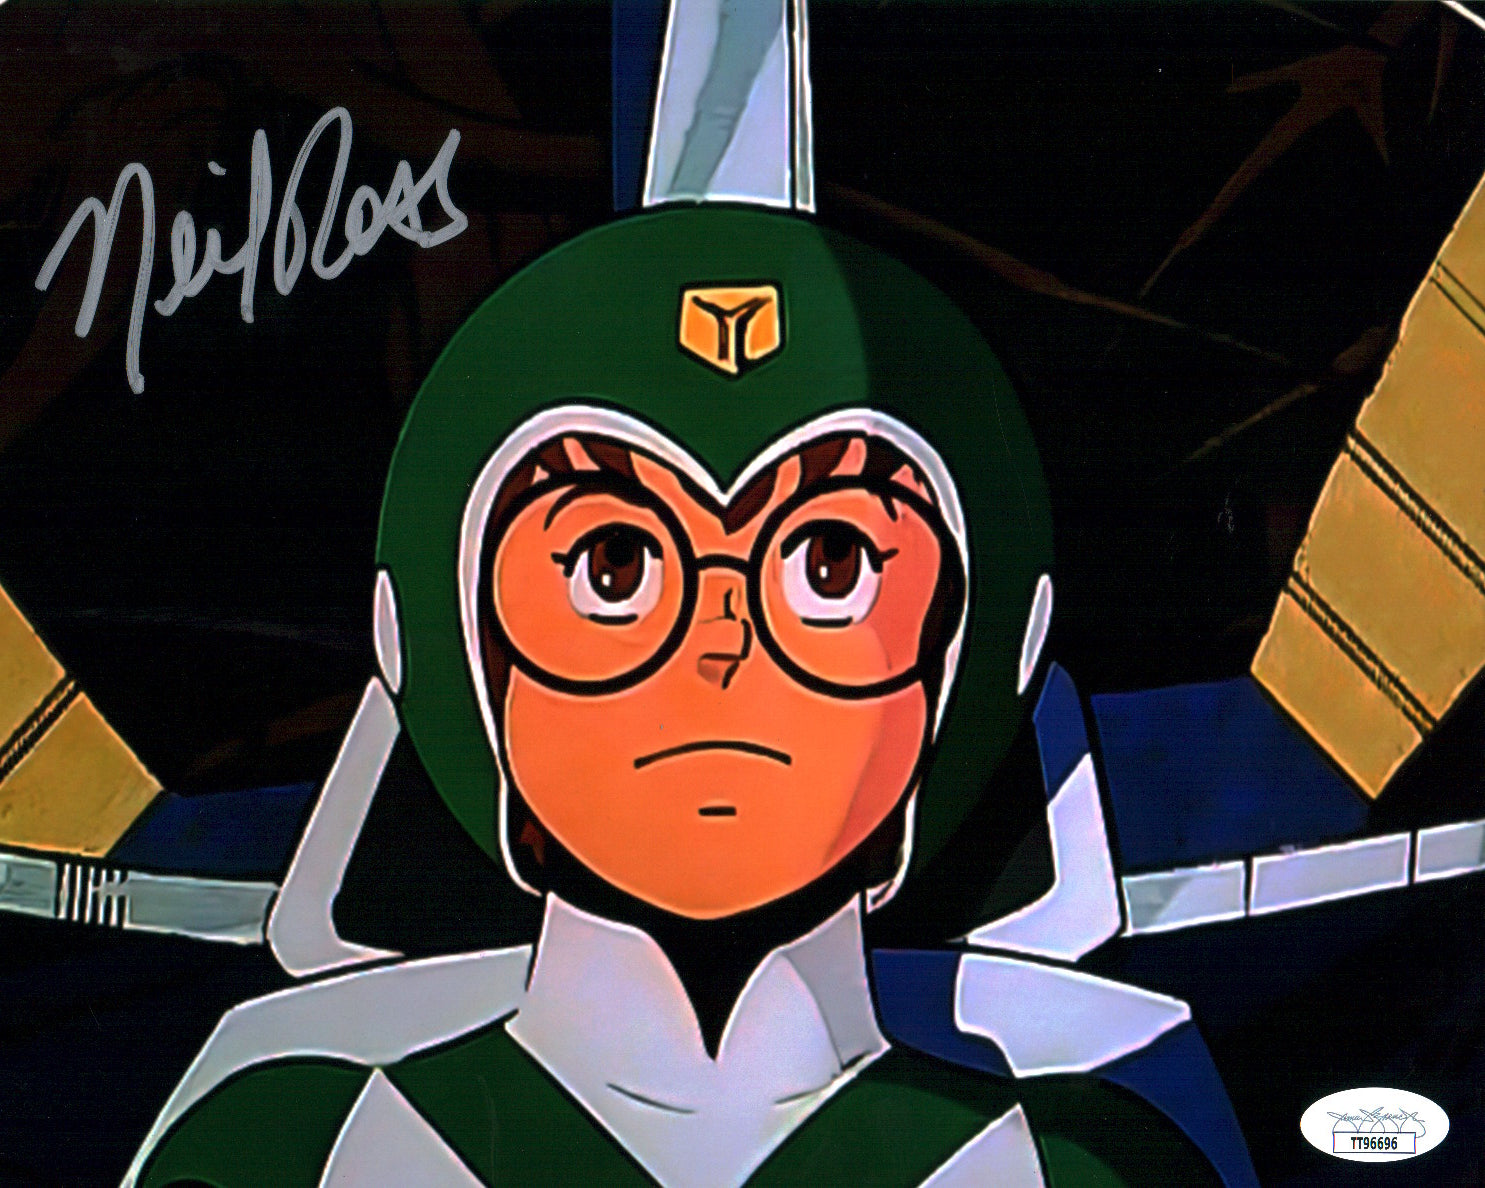 Neil Ross Voltron: Defender of the Universe 8x10 Signed Photo JSA Certified Autograph GalaxyCon